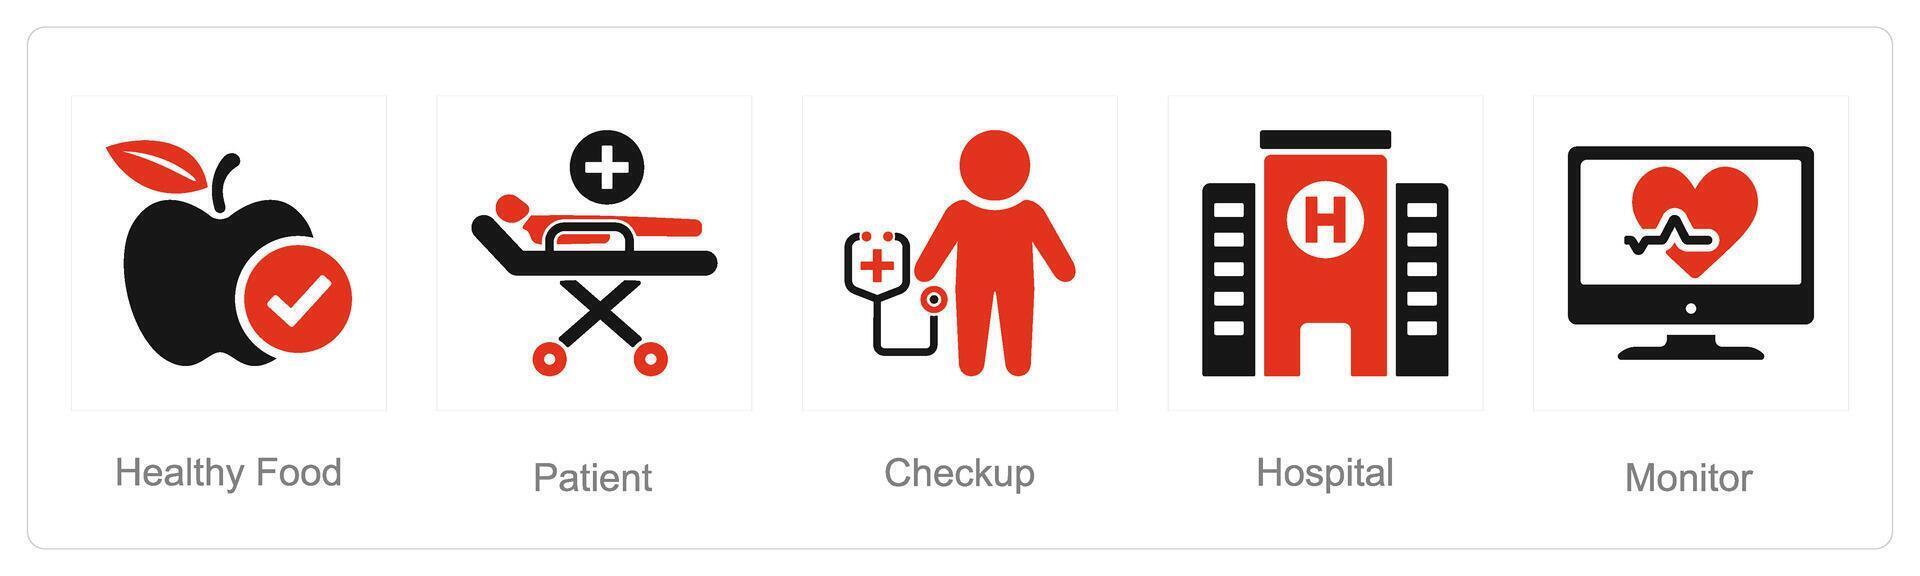 A set of 5 Health Checkup icons as healthy food, patient, checkup vector